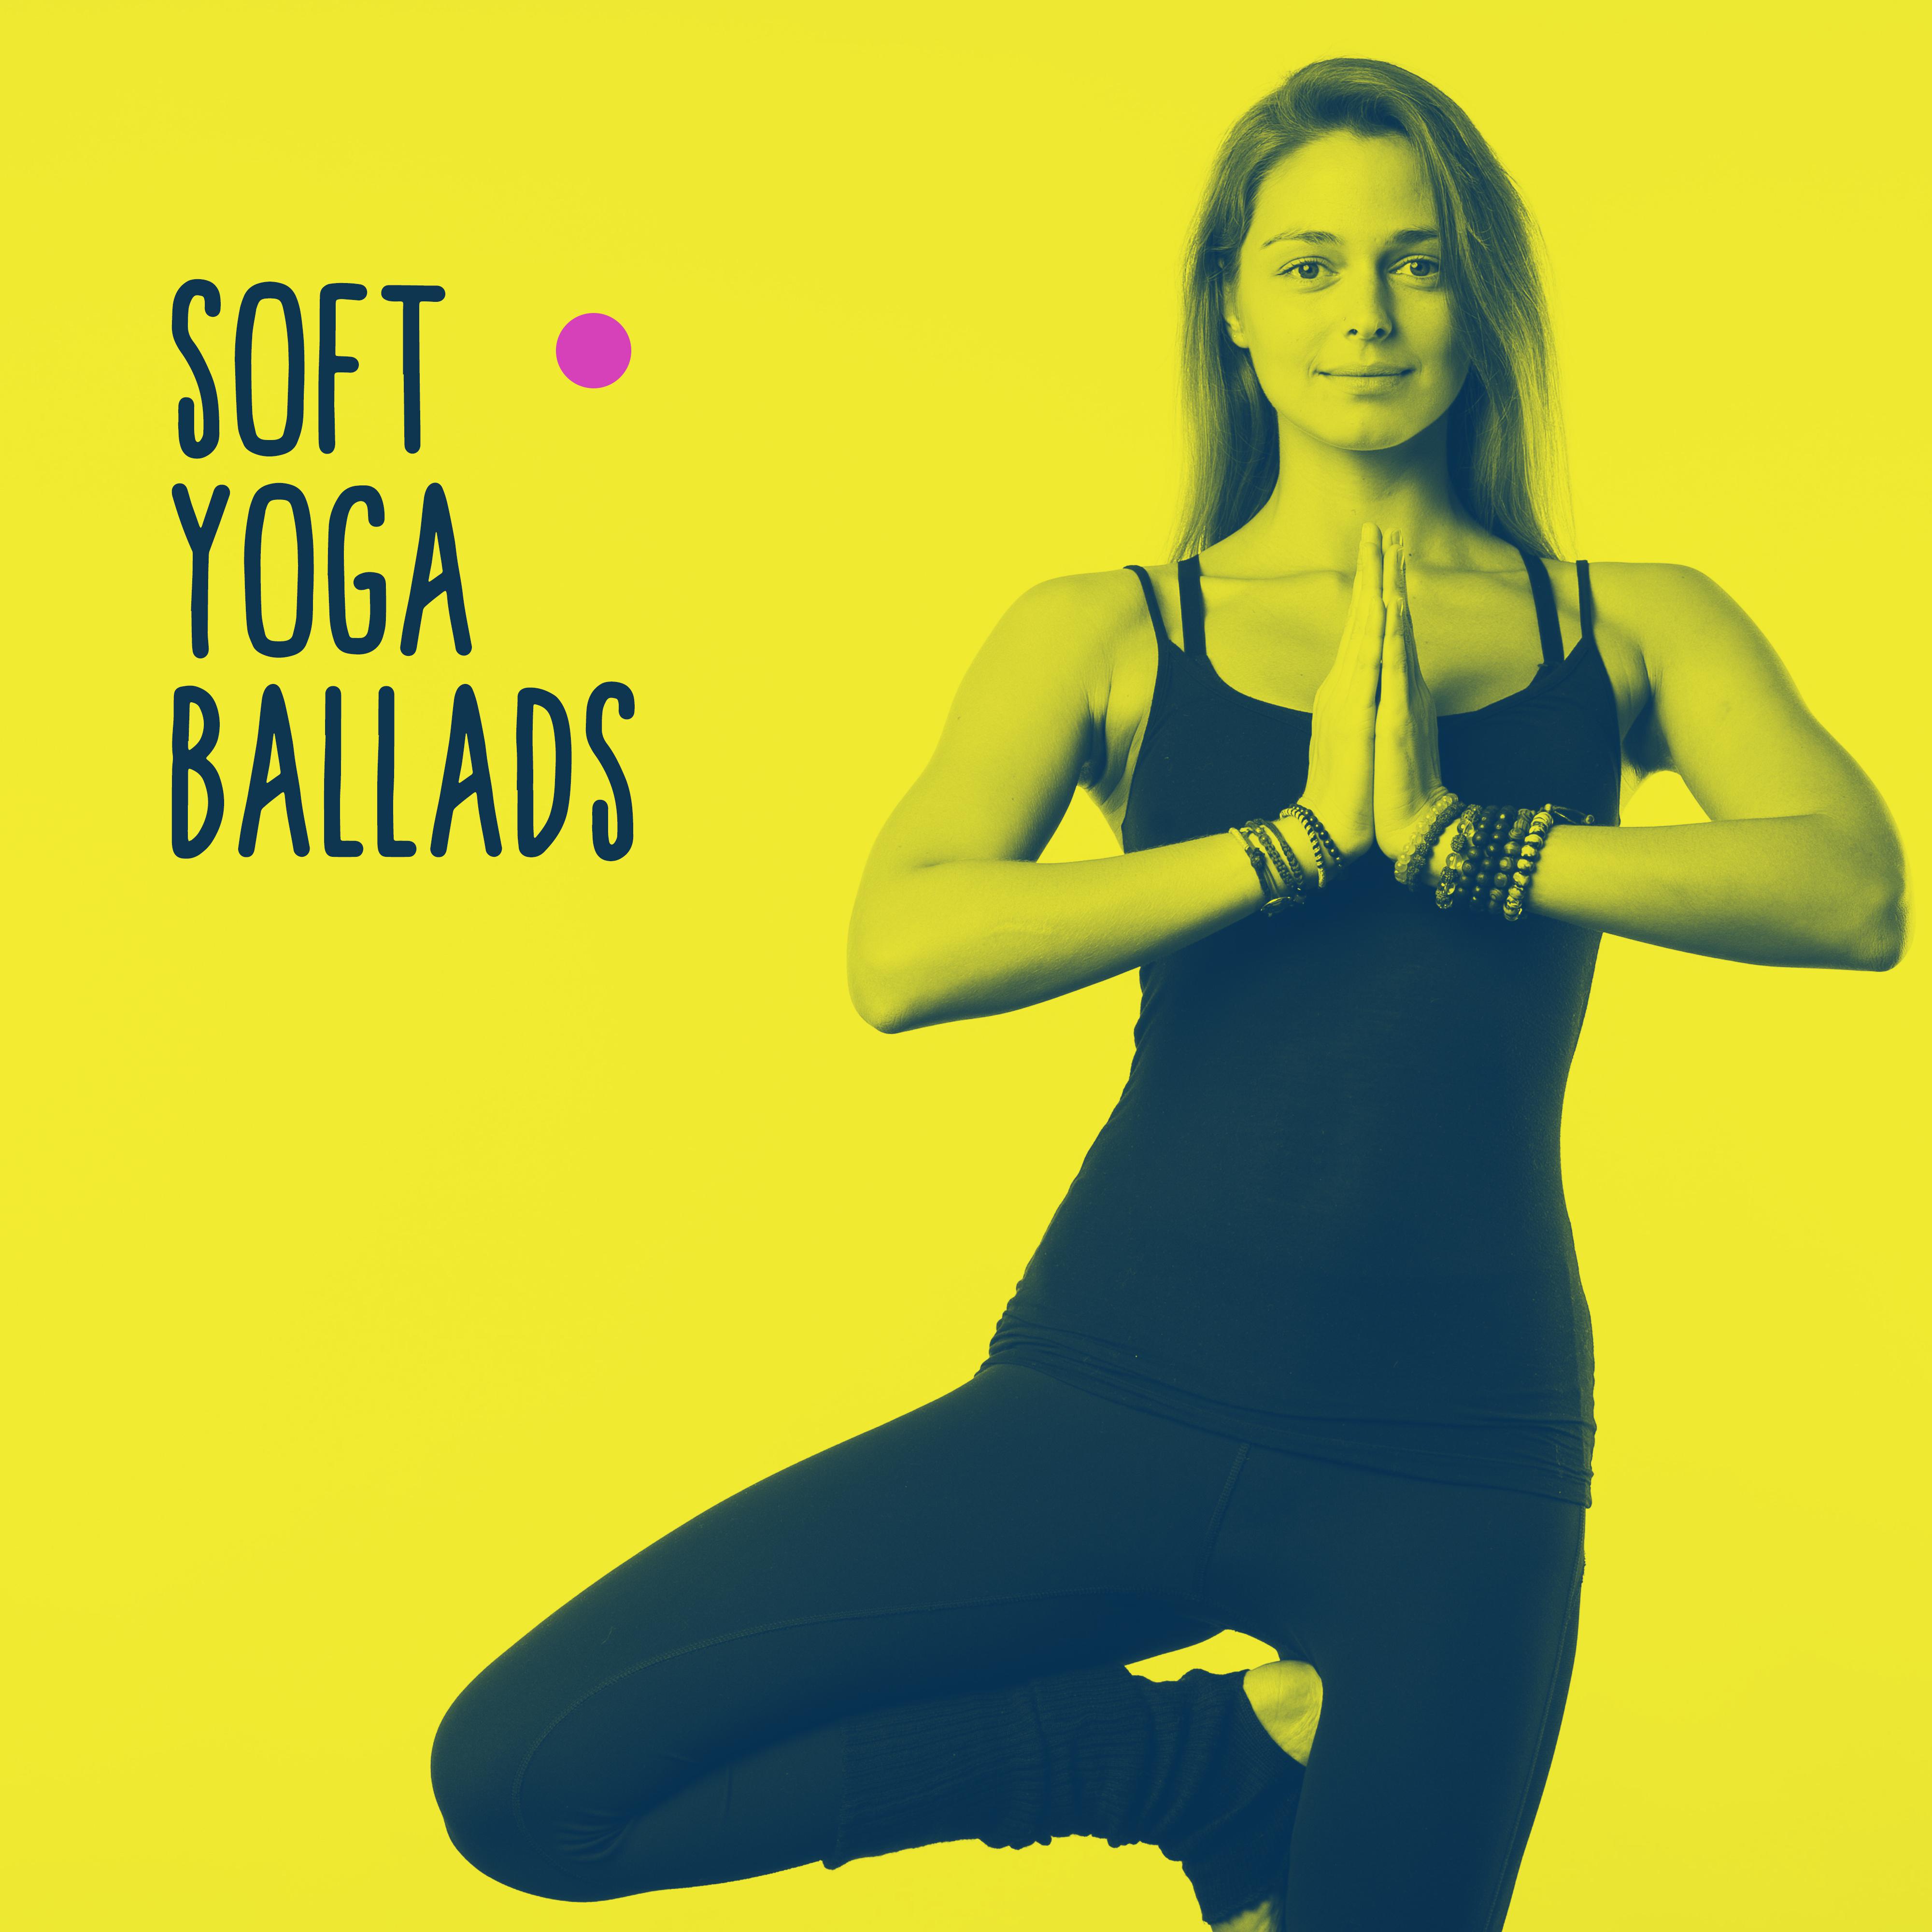 Soft Yoga Ballads: 2019 New Age Music Mix for Yoga, Meditation & Relaxation, Nature & Ambient Melodies, Relax Your Body & Mind, Spiritual Journey, Chakra Healing, Vital Energy Increase